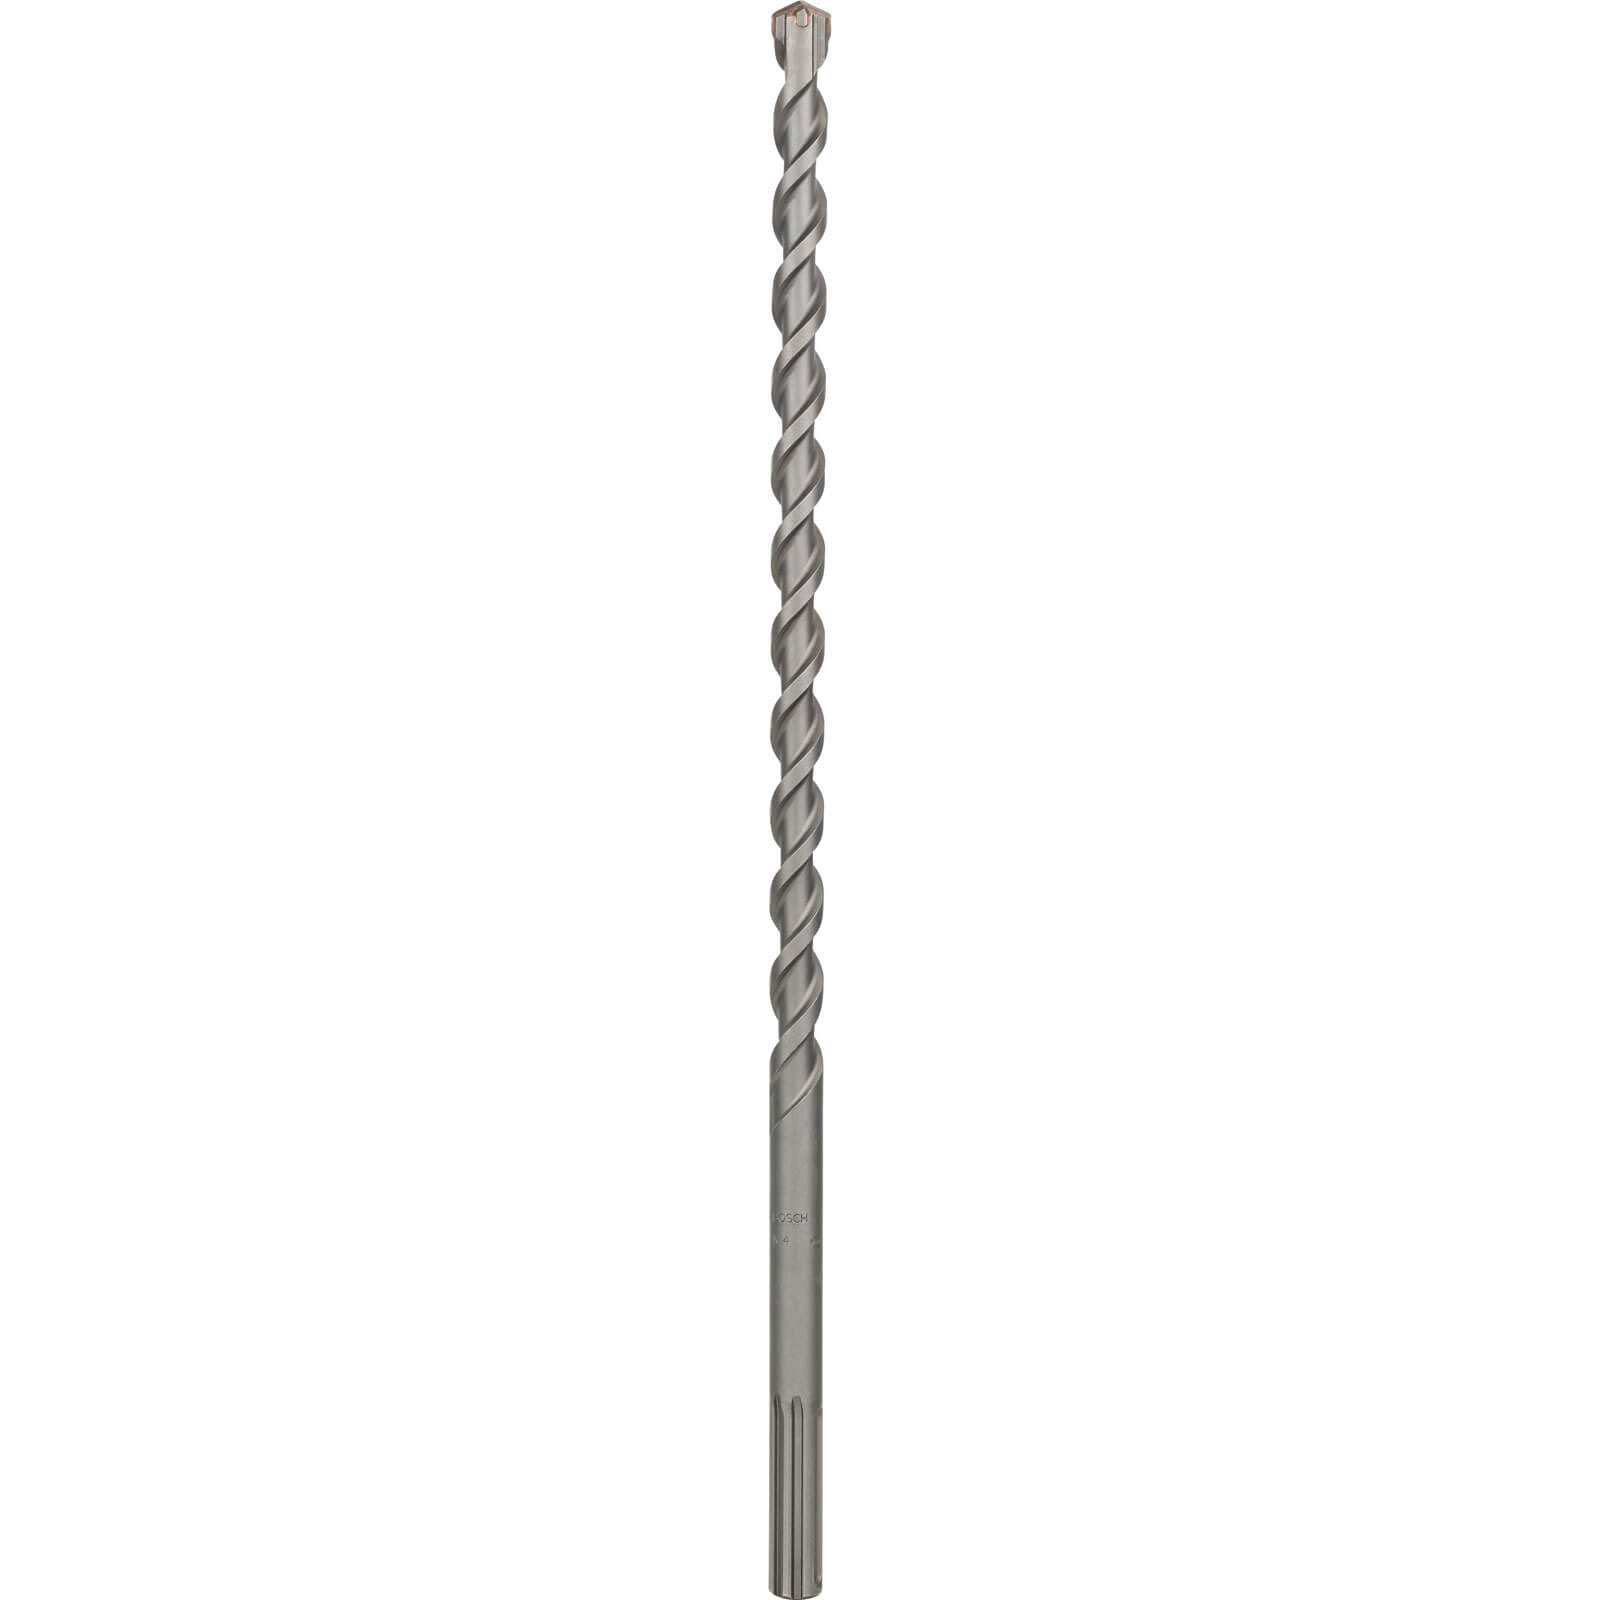 Image of Bosch M4 SDS Max Masonry Drill Bit 20mm 520mm Pack of 1